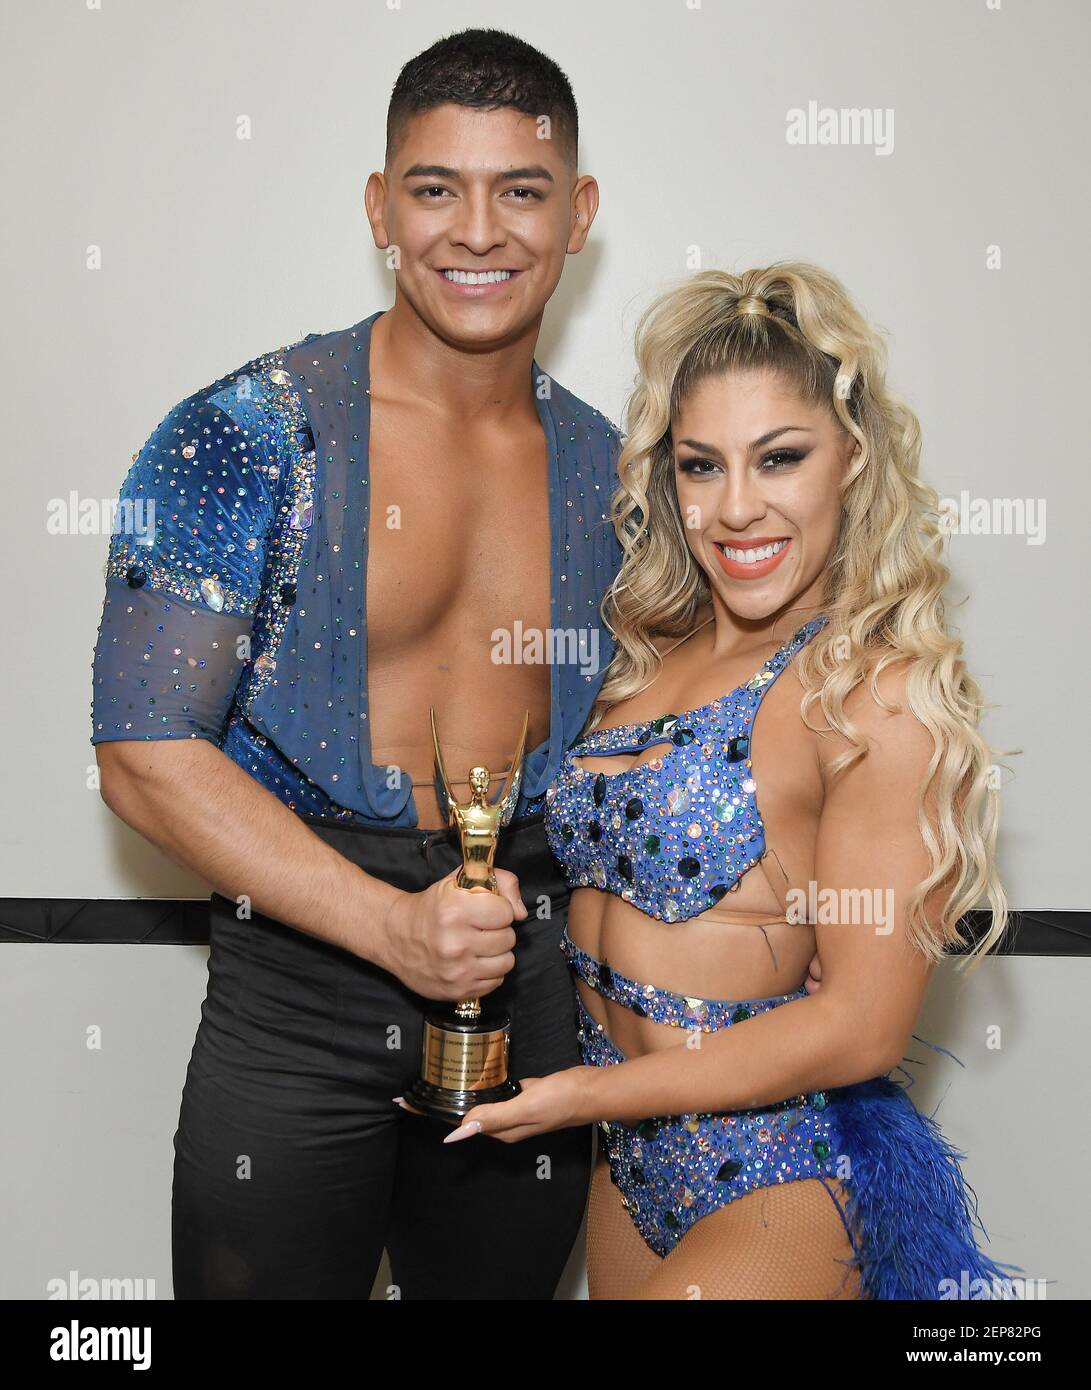 Ricardo Vega and Karen Forcano, Winner of Outstanding Choreography  Television Reality Show/.Competition for “World Of Dance” backstage at the  9th Annual Choreography Awards held at the Saban Theatre in Beverly Hills,  CA